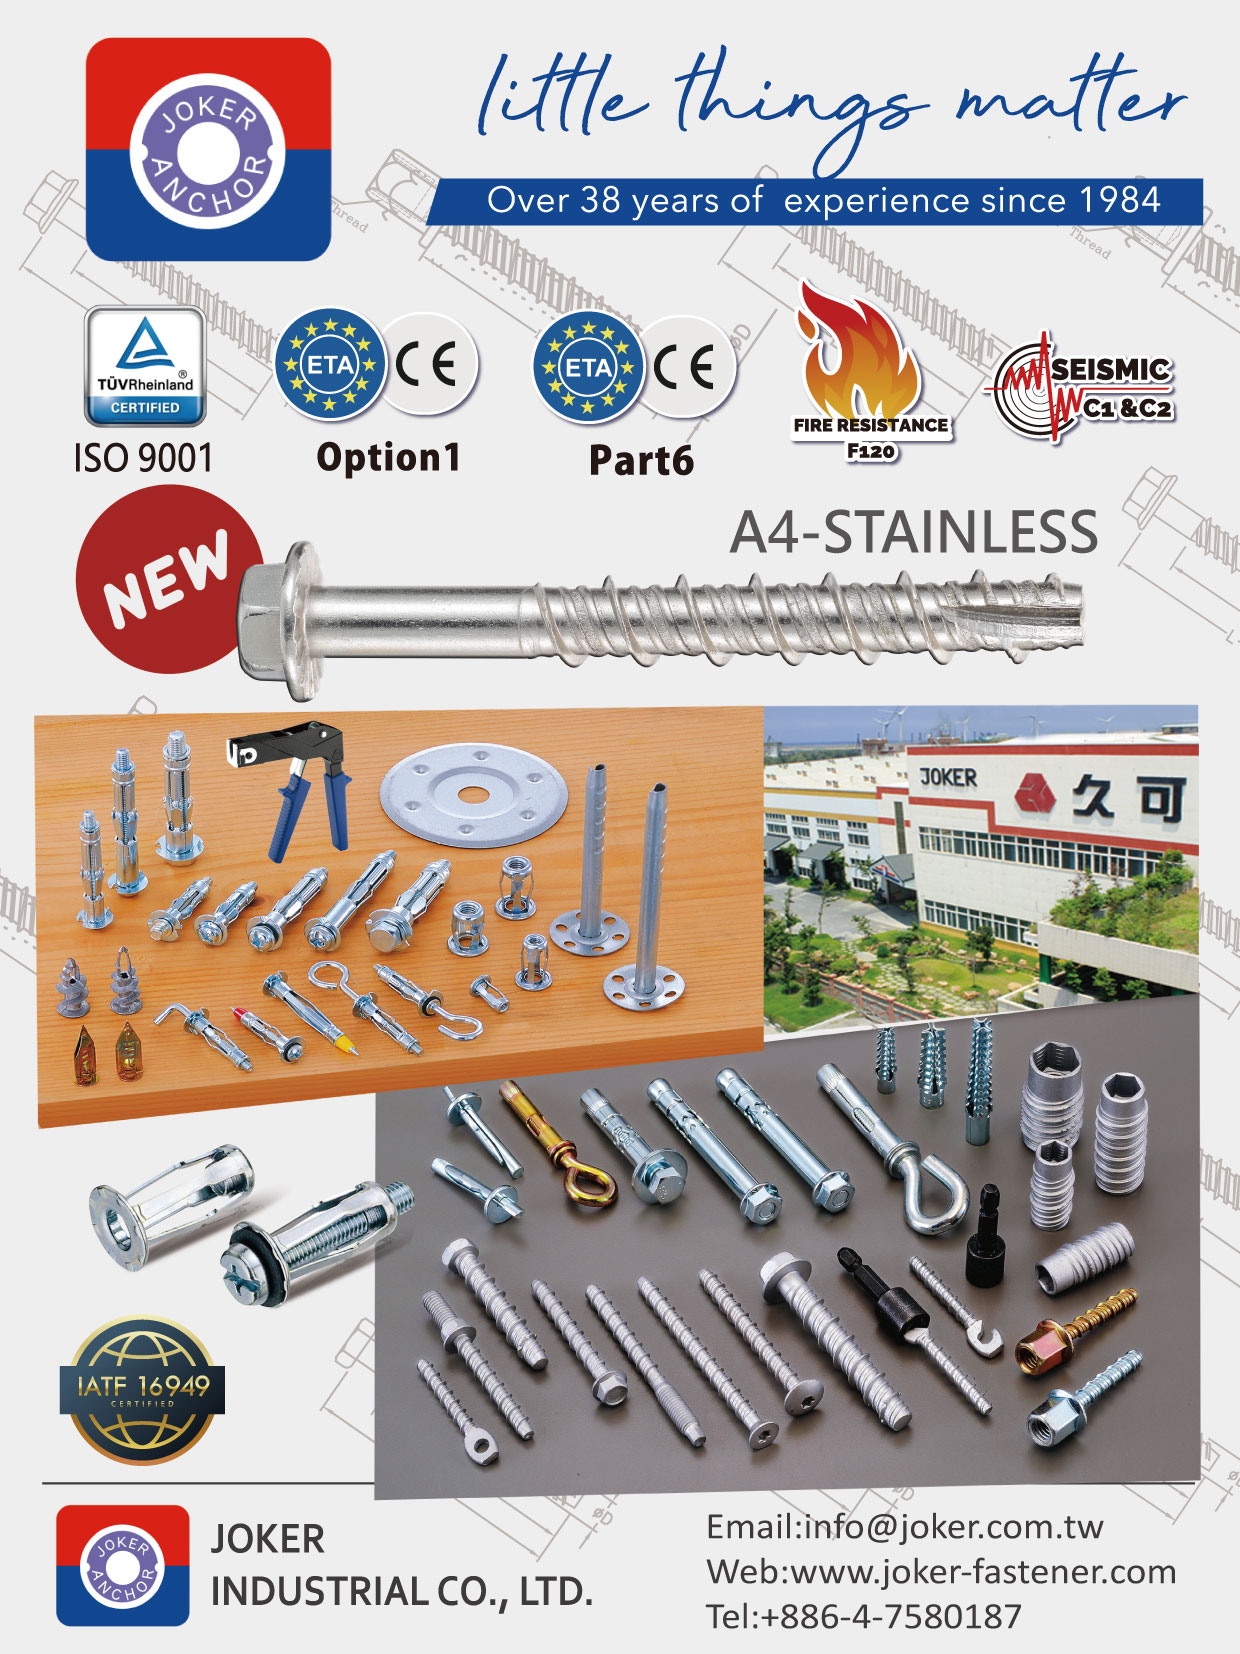 JOKER INDUSTRIAL CO., LTD.  , Mechanical and Heavy Duty Anchors, Concrete screw anchor, SISSY STUD , Safety nail ceiling anchor, Sleeve anchor, Steel hammer anchor, SPENDARL, Hammer driver anchor, Screw in screw system anchor, SISSY ANCHOR, Lightweight and Plasterboard Fixings, Zinc alloy anchor, EASY ANCHOR, Hollow wall anchor, Express nail, Legs anchor, NEW FIXING, Metal Universal Plug, Rivet JACK NUT, Tool and Accessory, Hollow wall setting gun 1801, Hollow wall mounting tool 1802, Hollow wall setting tool 1803, Hollow wall mounting tool 1804, Insulation Fixing, Framework fasteners, Zinc alloy frame fixing, Metal frame  , Hollow Wall Anchors